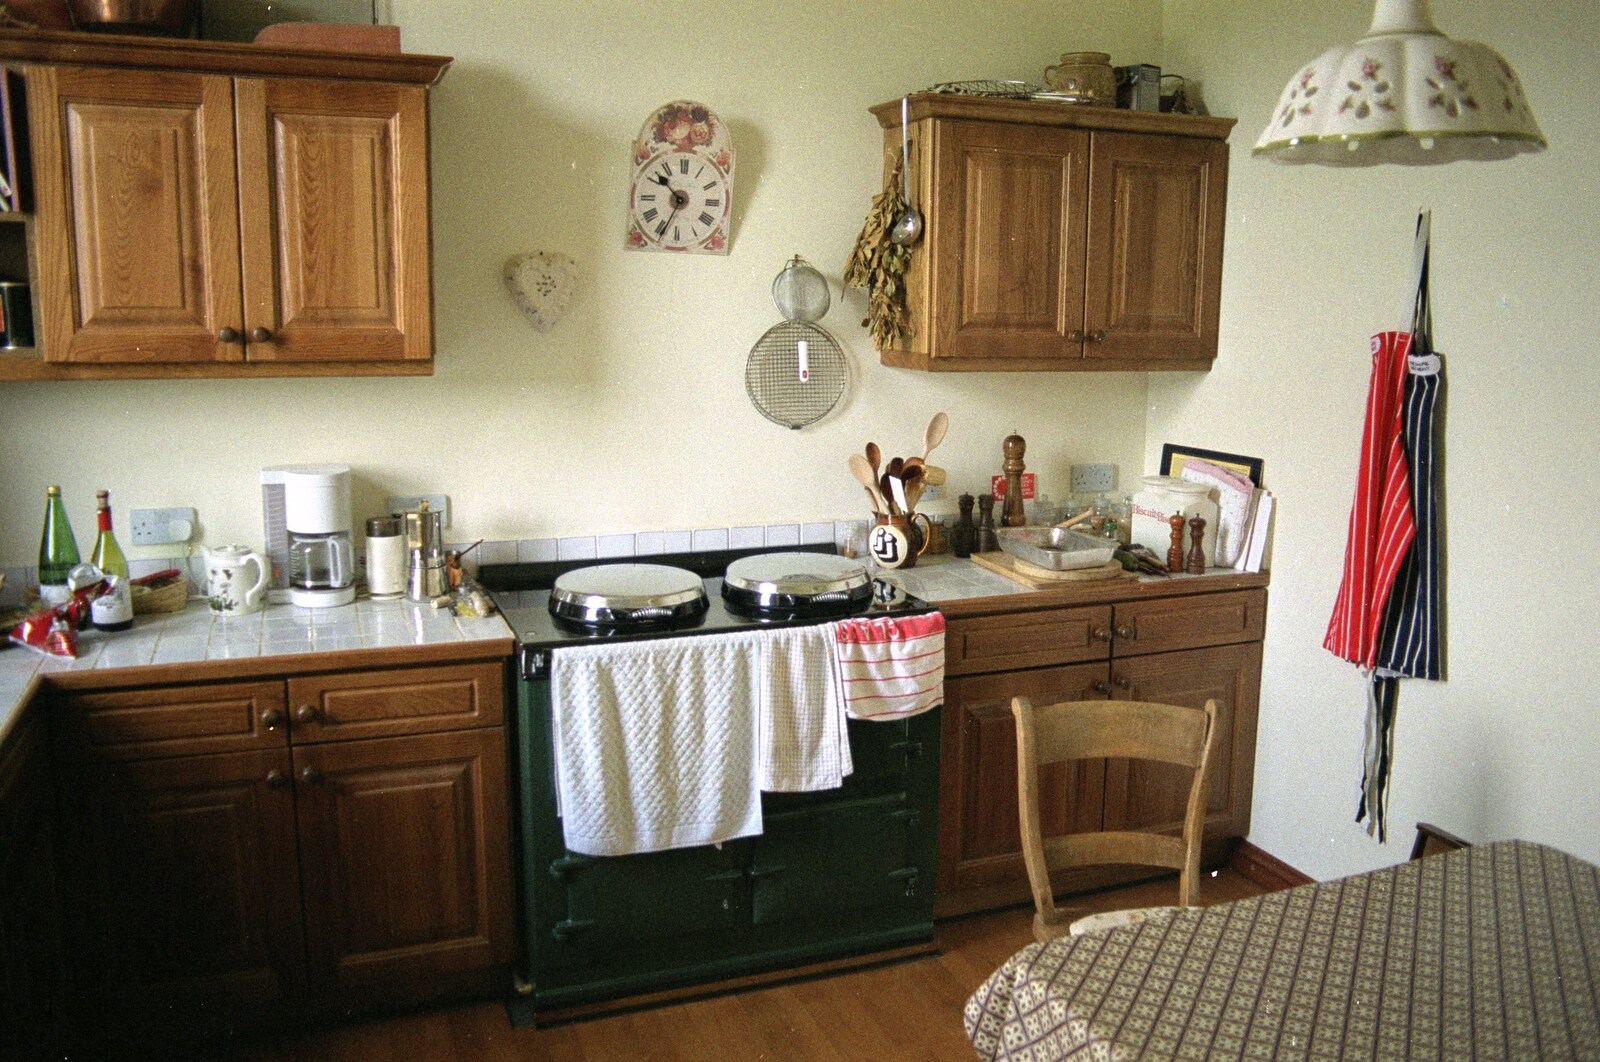 The Aga in the kitchen from Plymouth and The Chapel, Hoo Meavy, Devon - 25th July 1991